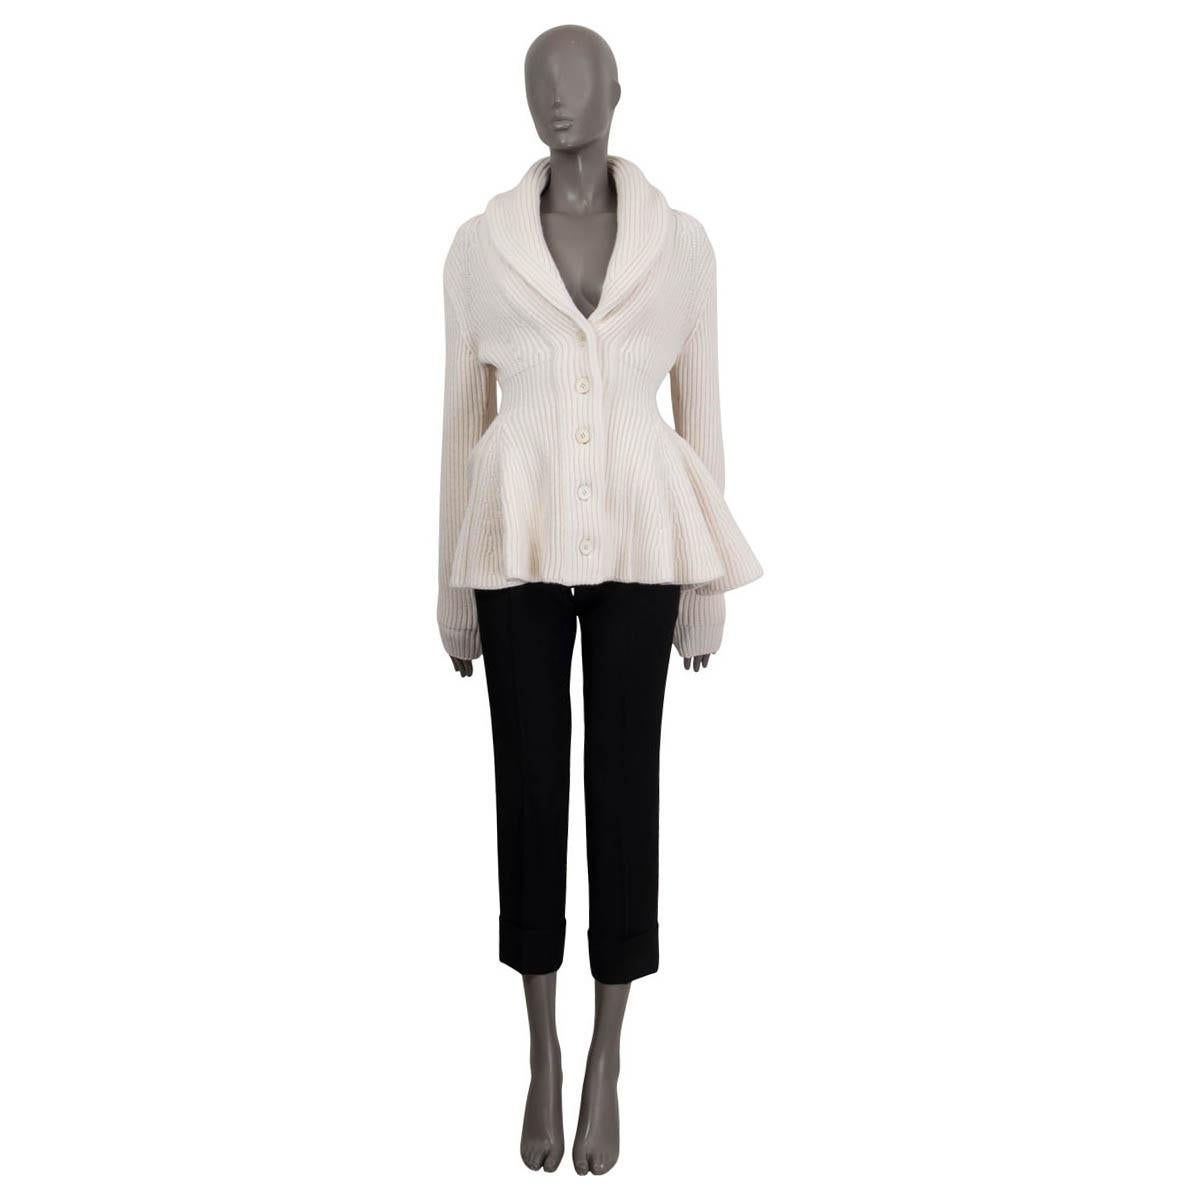 100% authentic Alexander McQueen 2021 peplum rib knit jacket in white wool (100% please note the content tag is missing). Features a shawl collar and a deep v-neck. Opens with four buttons on the front. Unlined. Has been worn and is in excellent